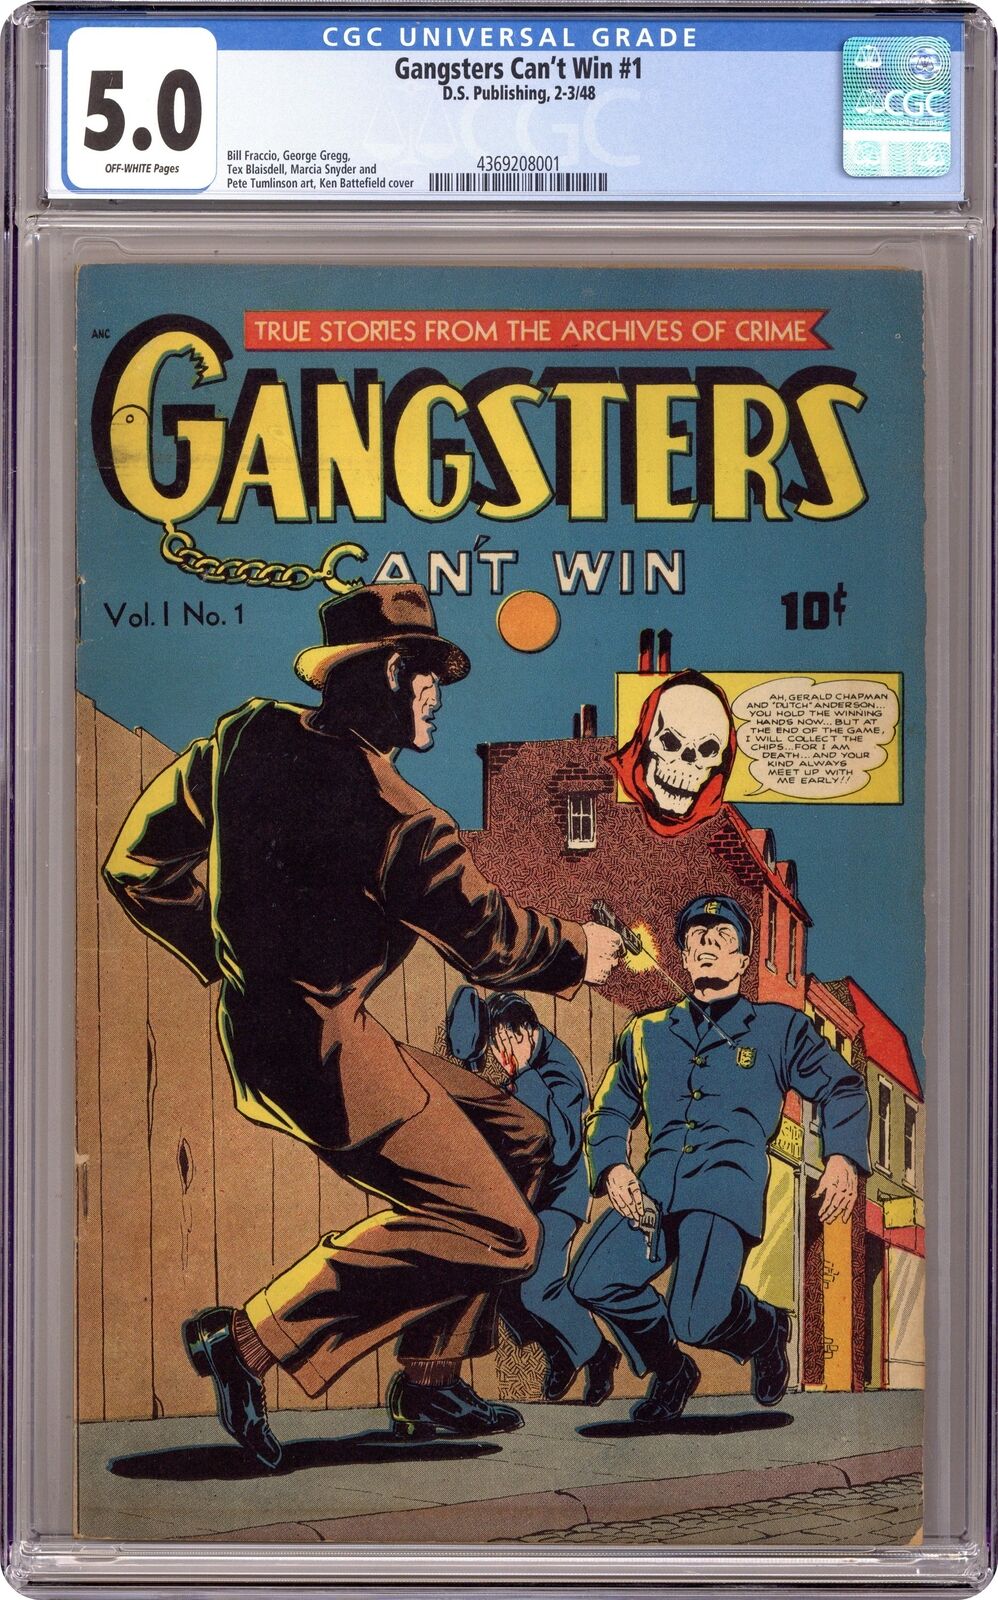 Gangsters Can\'t Win #1 CGC 5.0 1948 4369208001